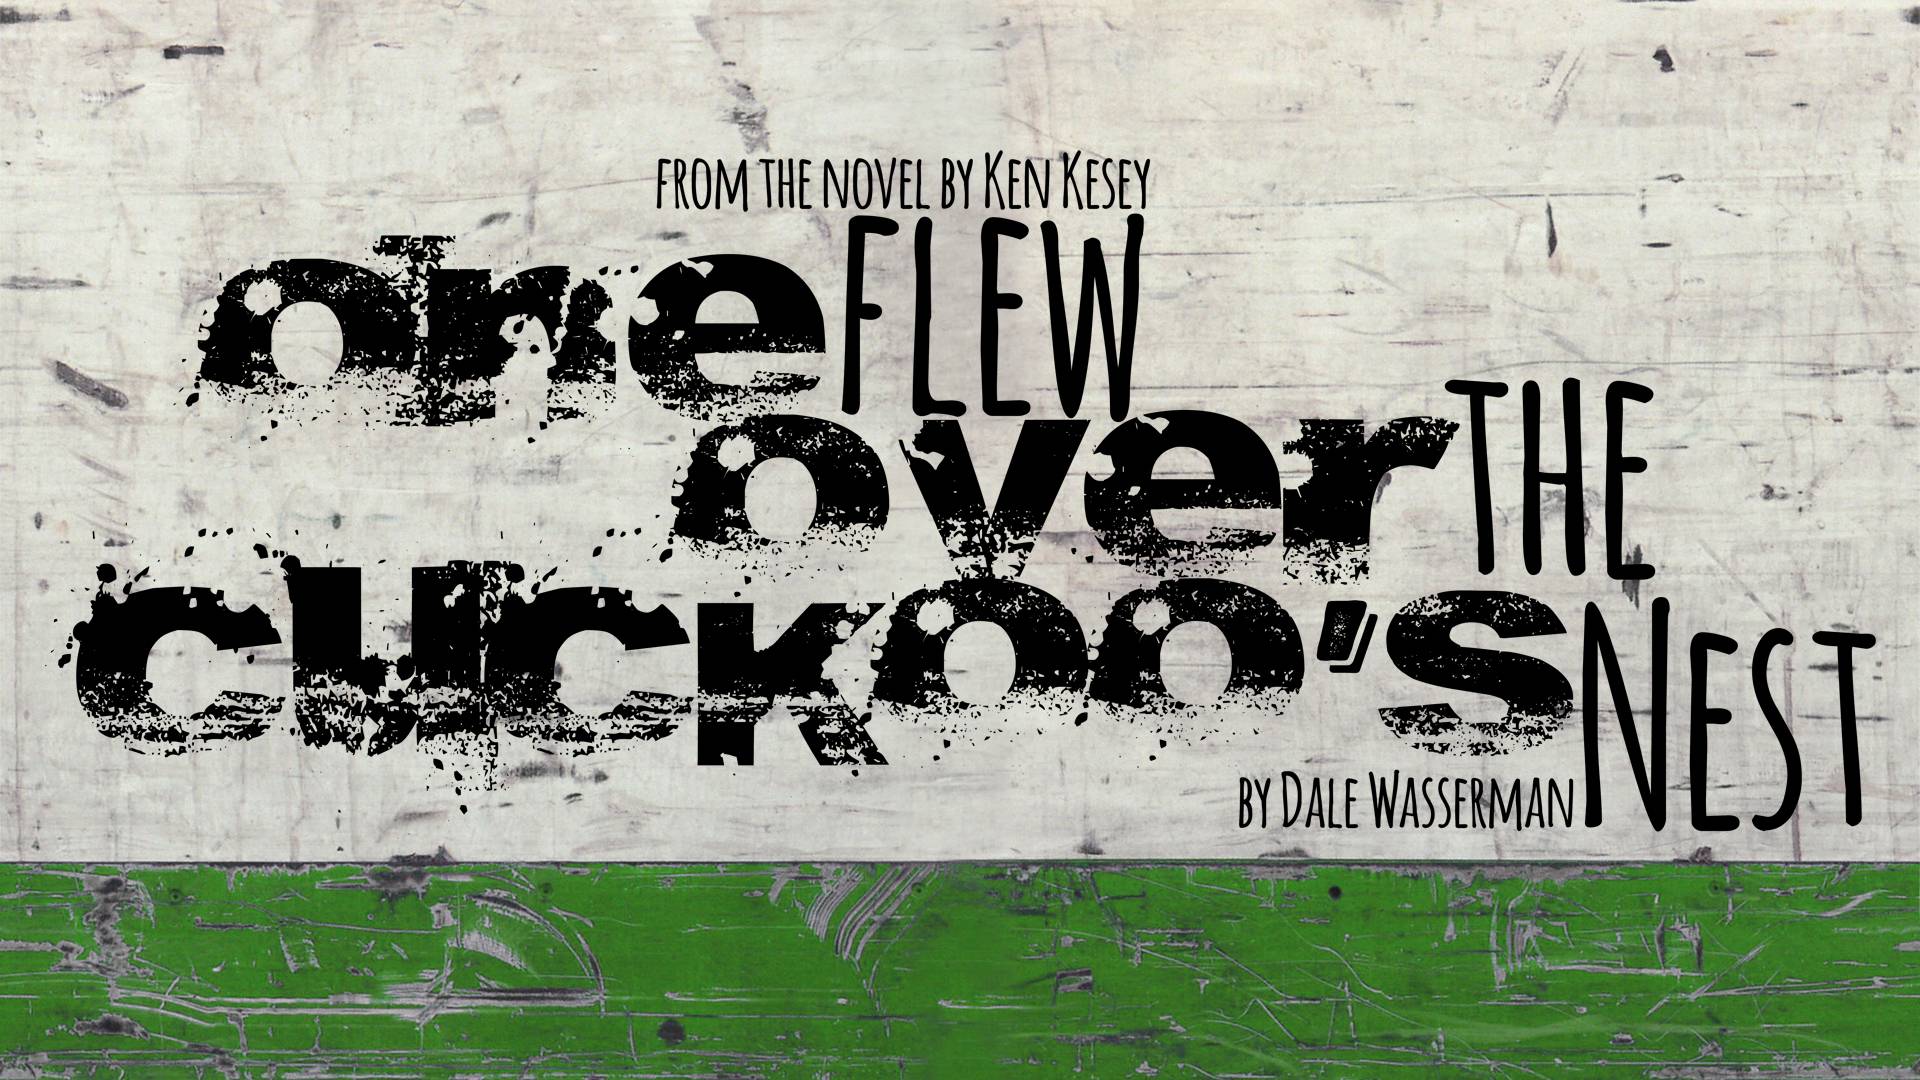 Auditions announced for ONE FLEW OVER THE CUCKOO'S NEST